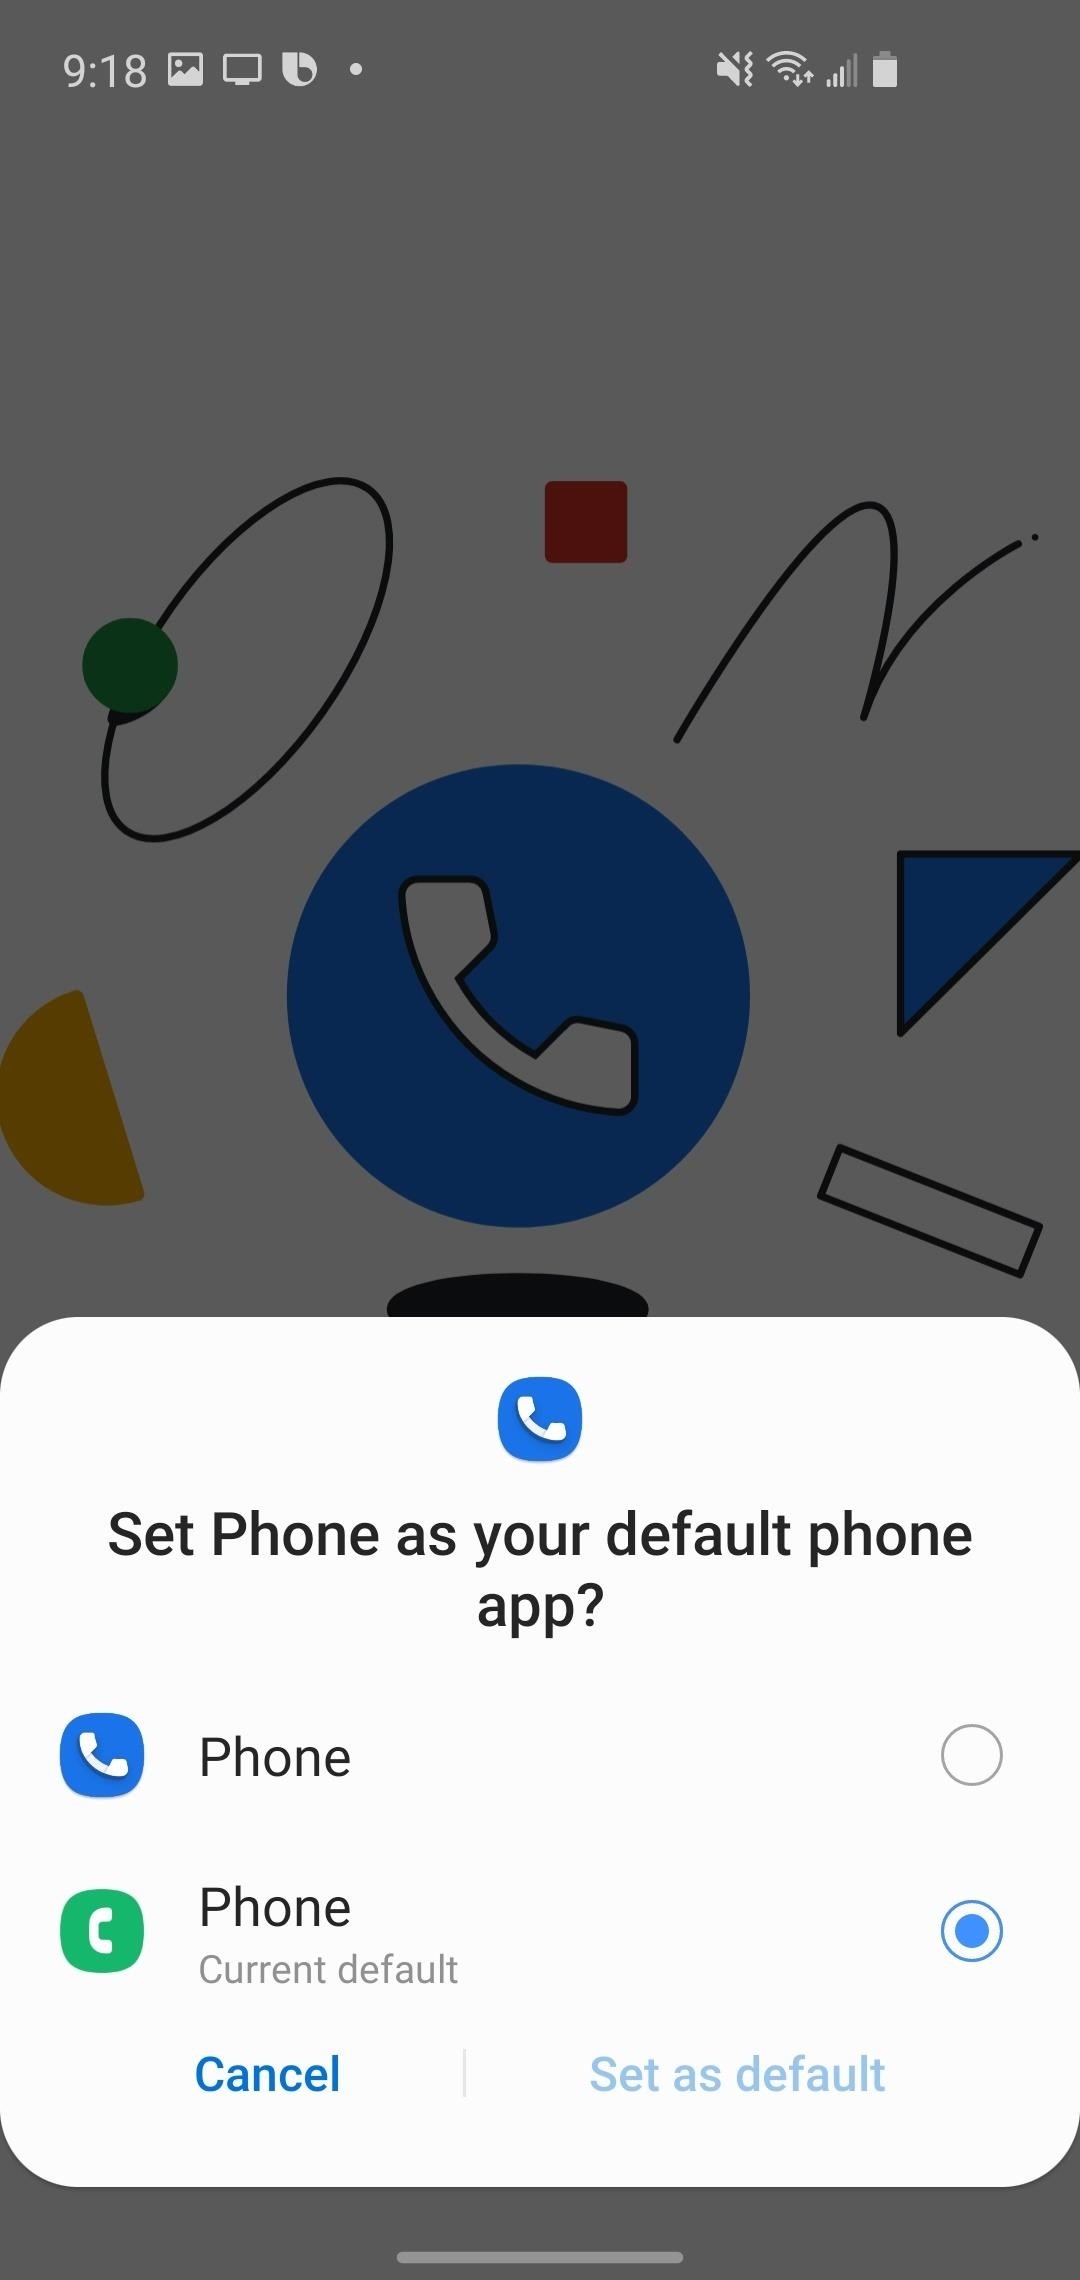 How to Customize the Quick Responses for Declining Calls in the Google Phone App